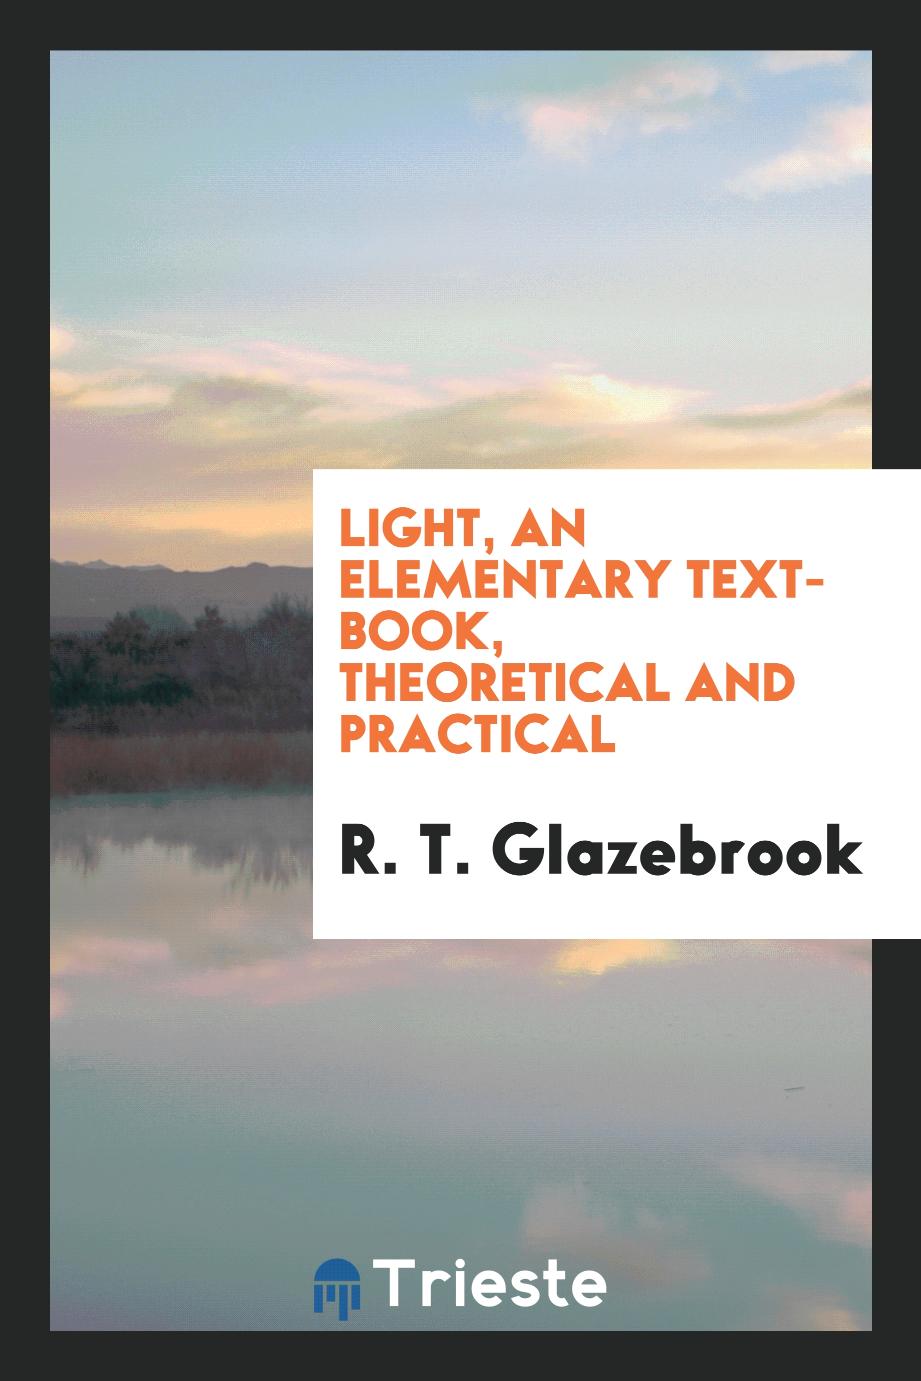 Light, an elementary text-book, theoretical and practical